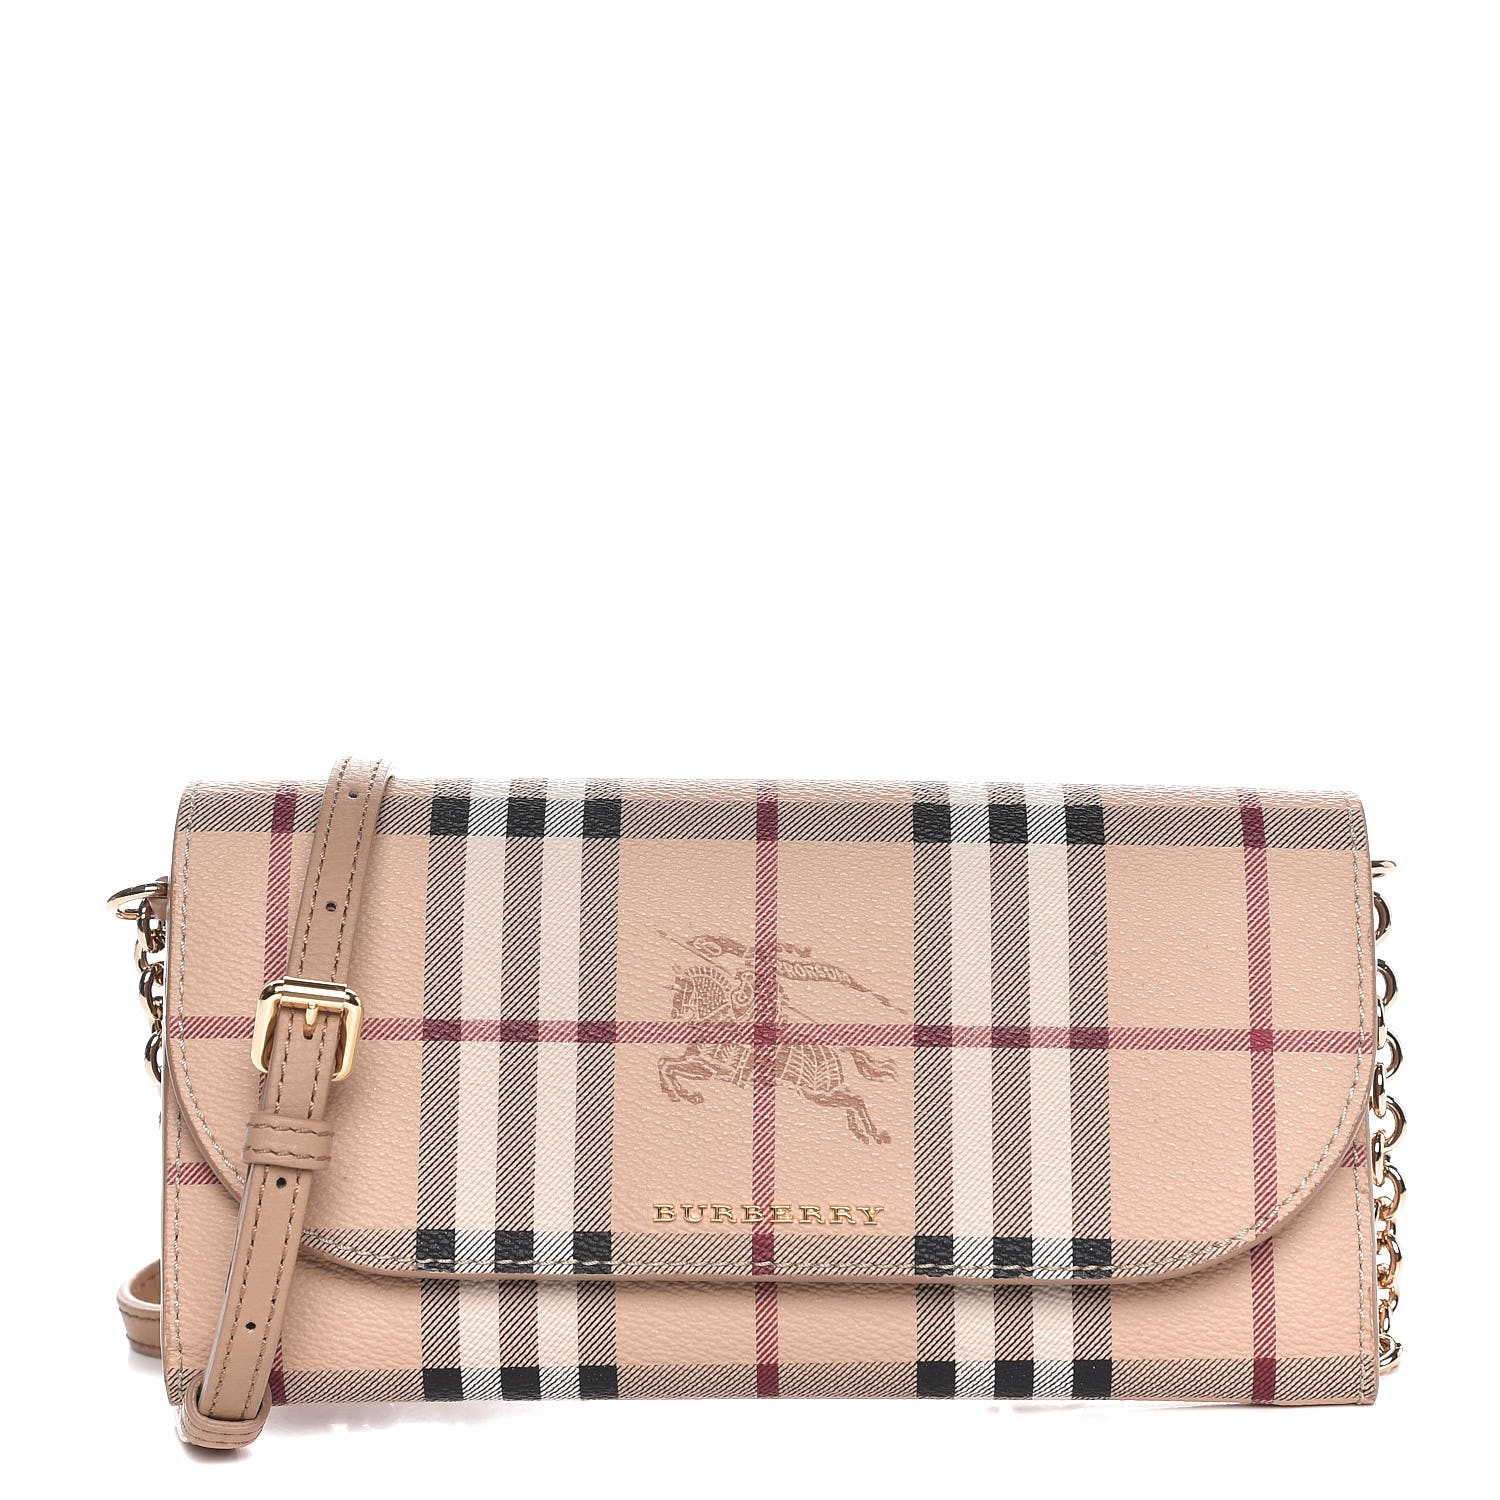 burberry henley leather wallet on a chain